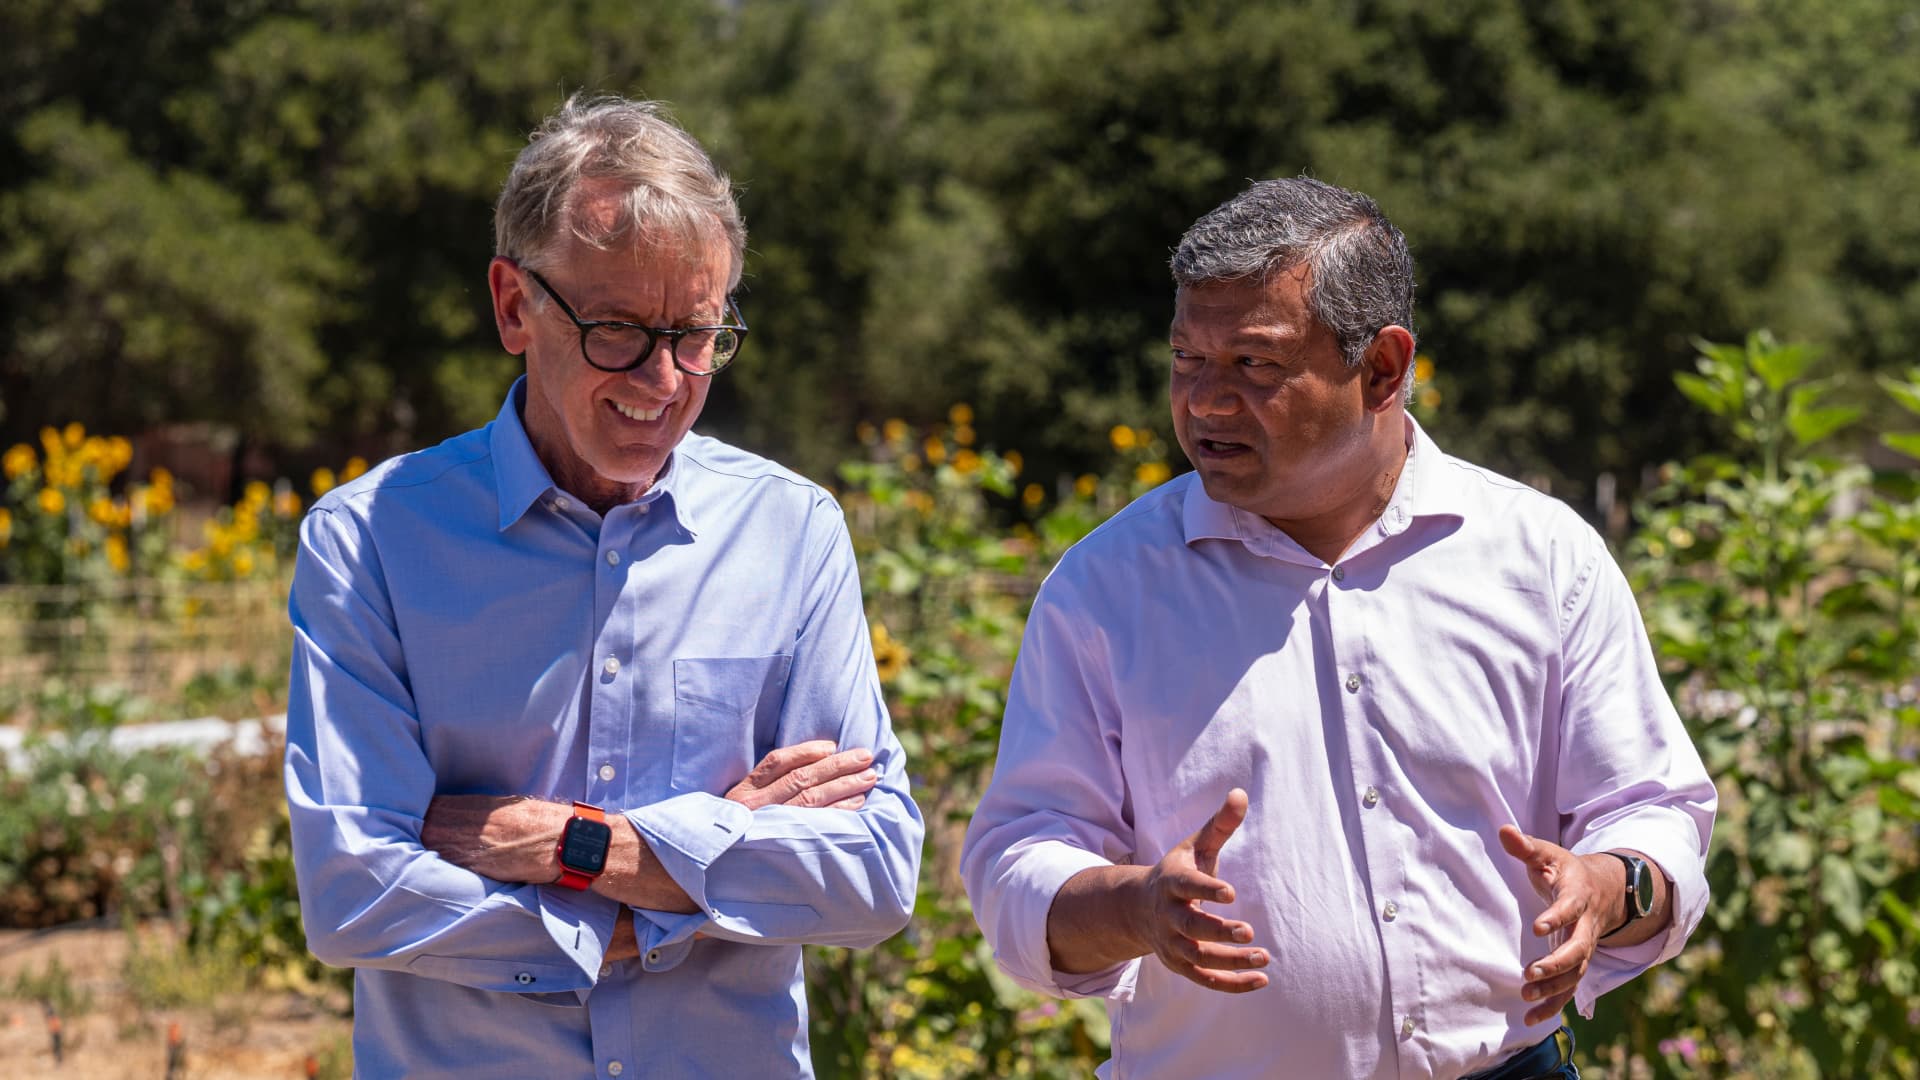 John Doerr, chairman and co-founder of Kleiner Perkins Caufield, left, and Arun Majumdar, dean of Stanford University's Doerr School of Sustainability, during an interview on an episode of Bloomberg Wealth with David Rubenstein in Stanford, California, US, on Friday, July 22, 2022. Venture capitalist John Doerr invested early in Google and Amazon, but passed on Tesla Inc. It's one of his biggest regrets.